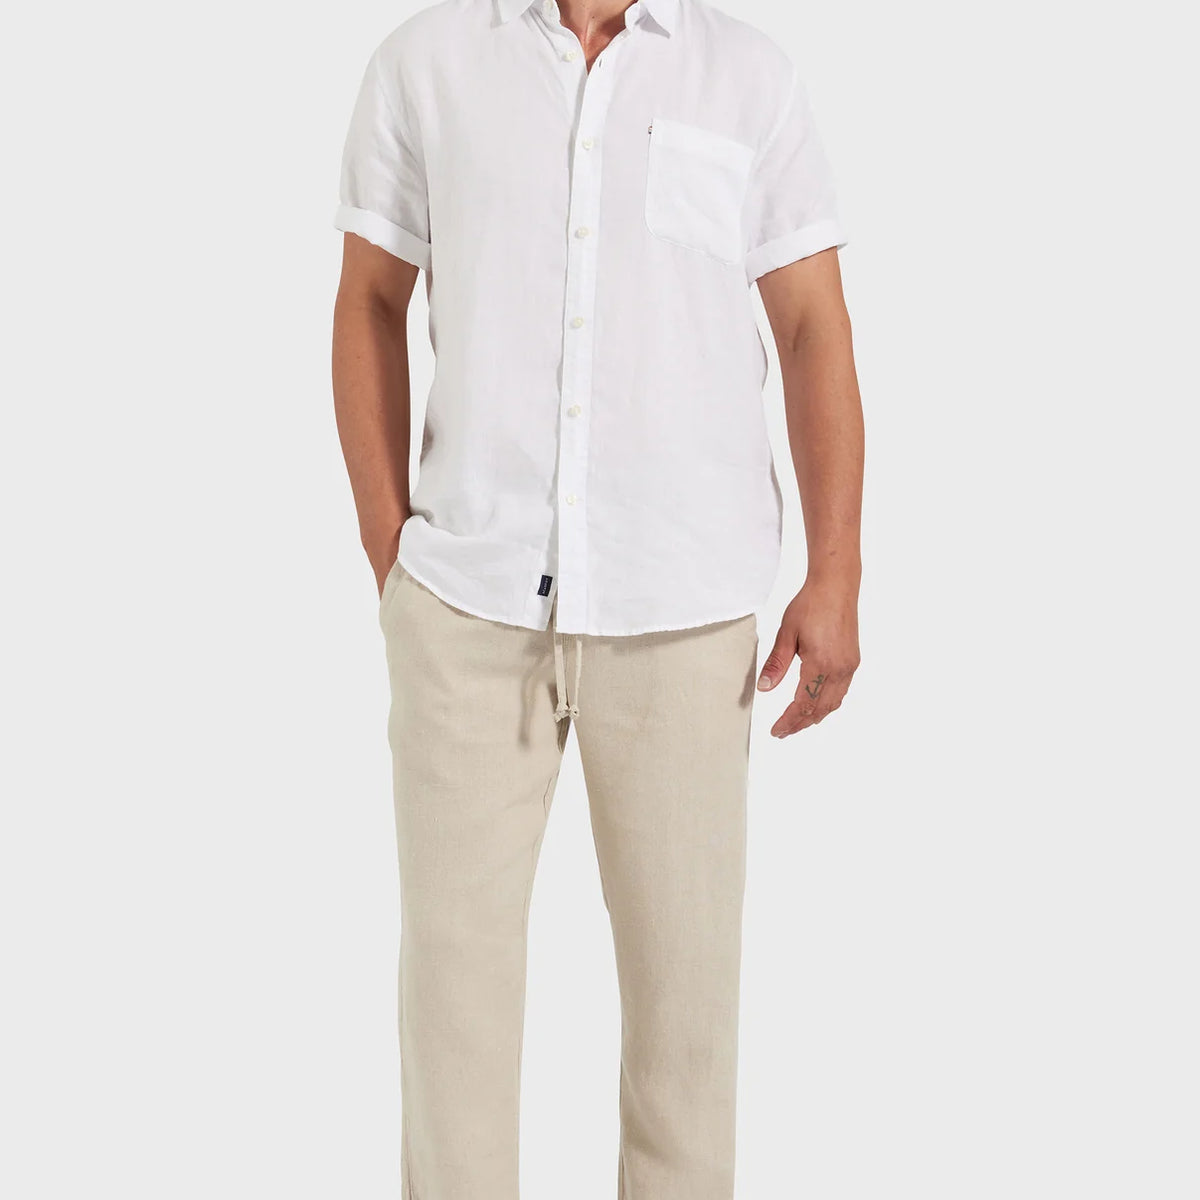 Riviera Linen Pant in Oatmeal